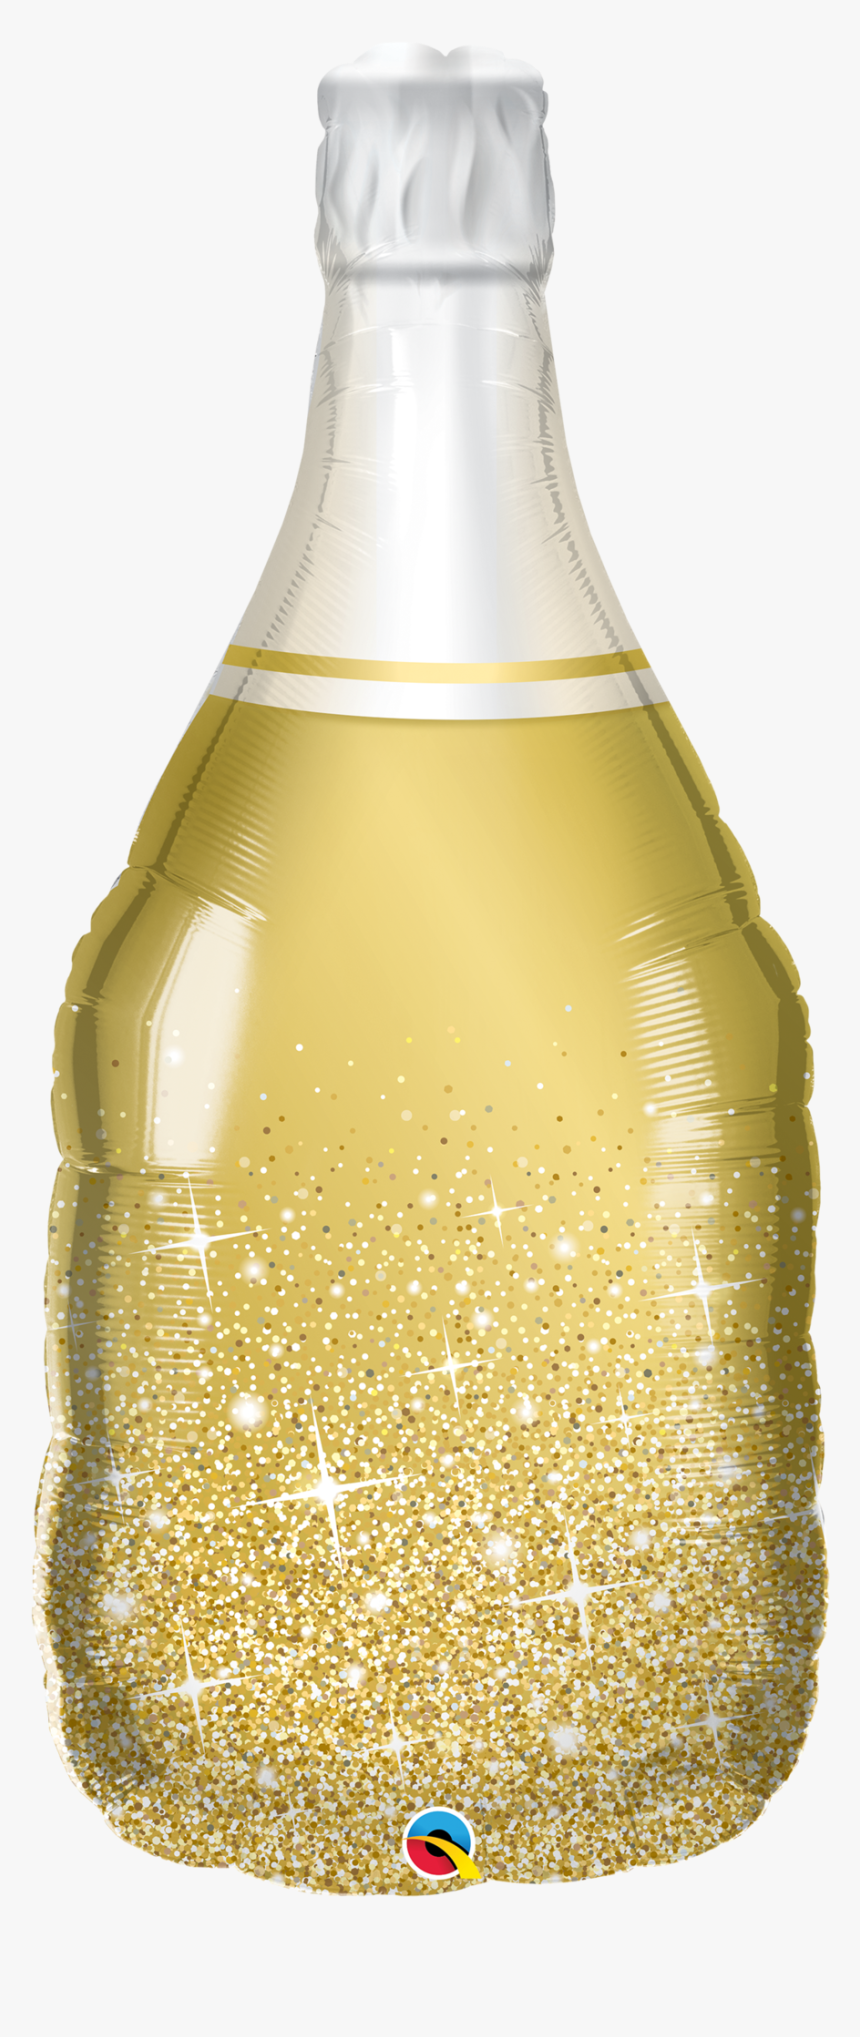 39"q Champagne / Wine Bottle Golden - Gold Champagne Bottle Balloon, HD Png Download, Free Download